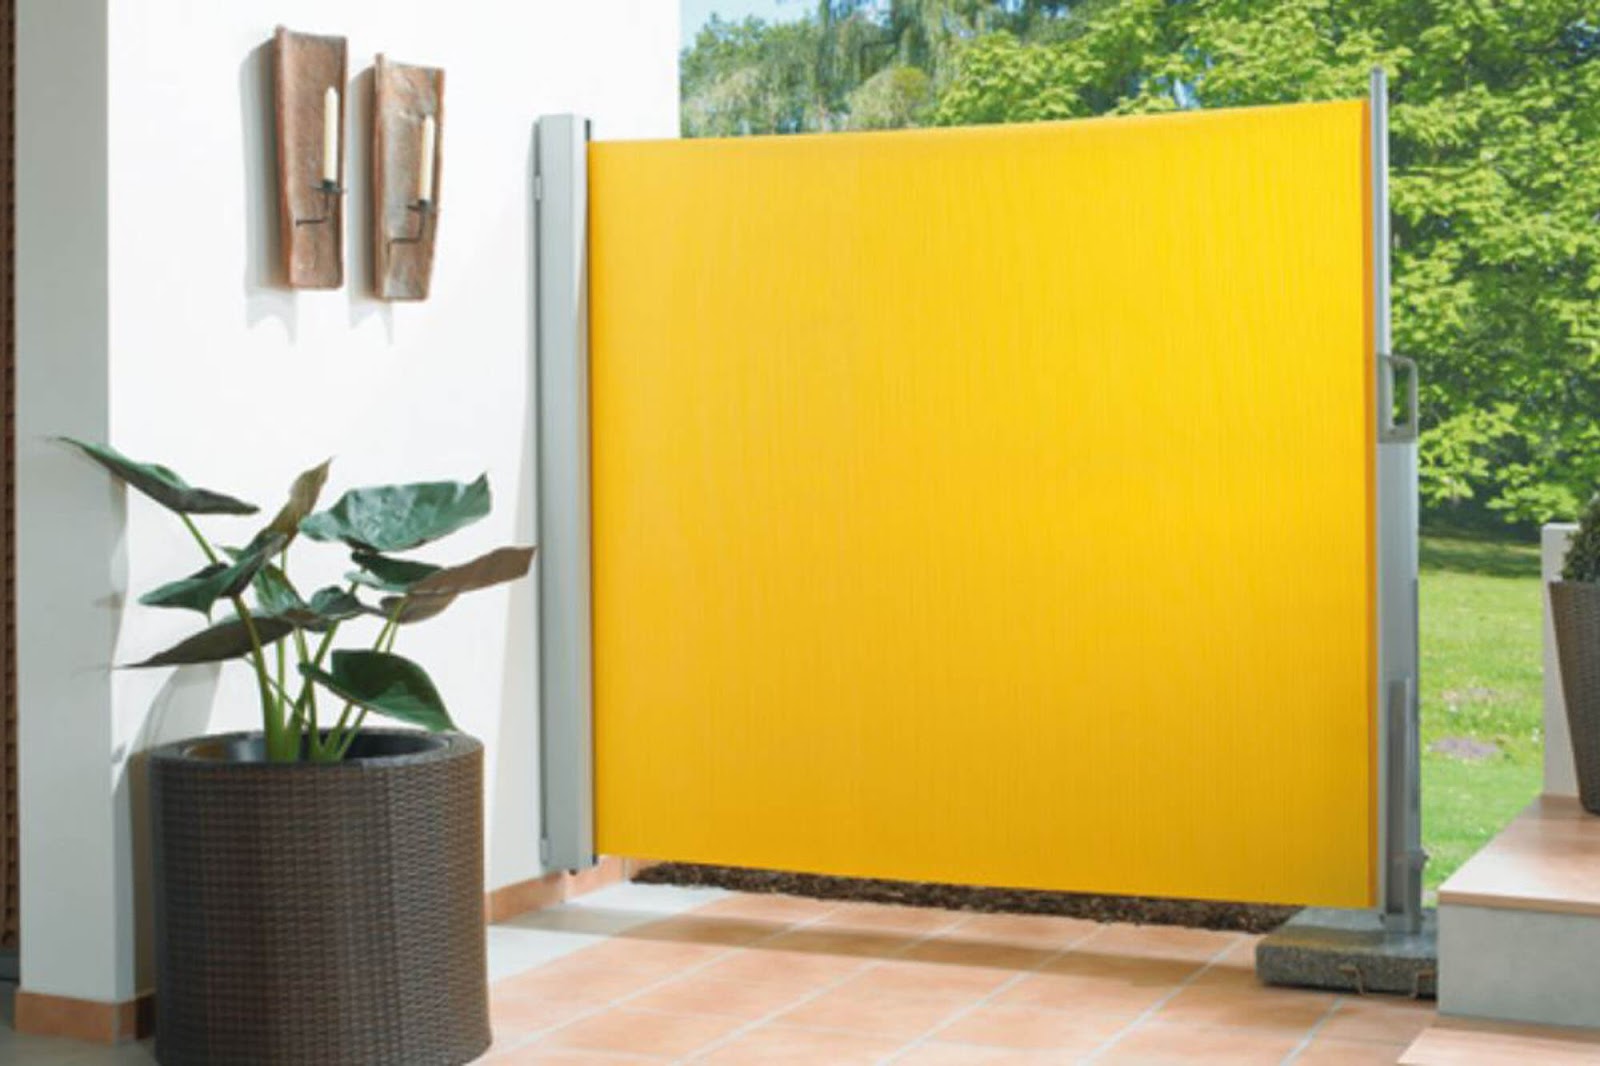 Canary yellow horizontal screen attached to a wall